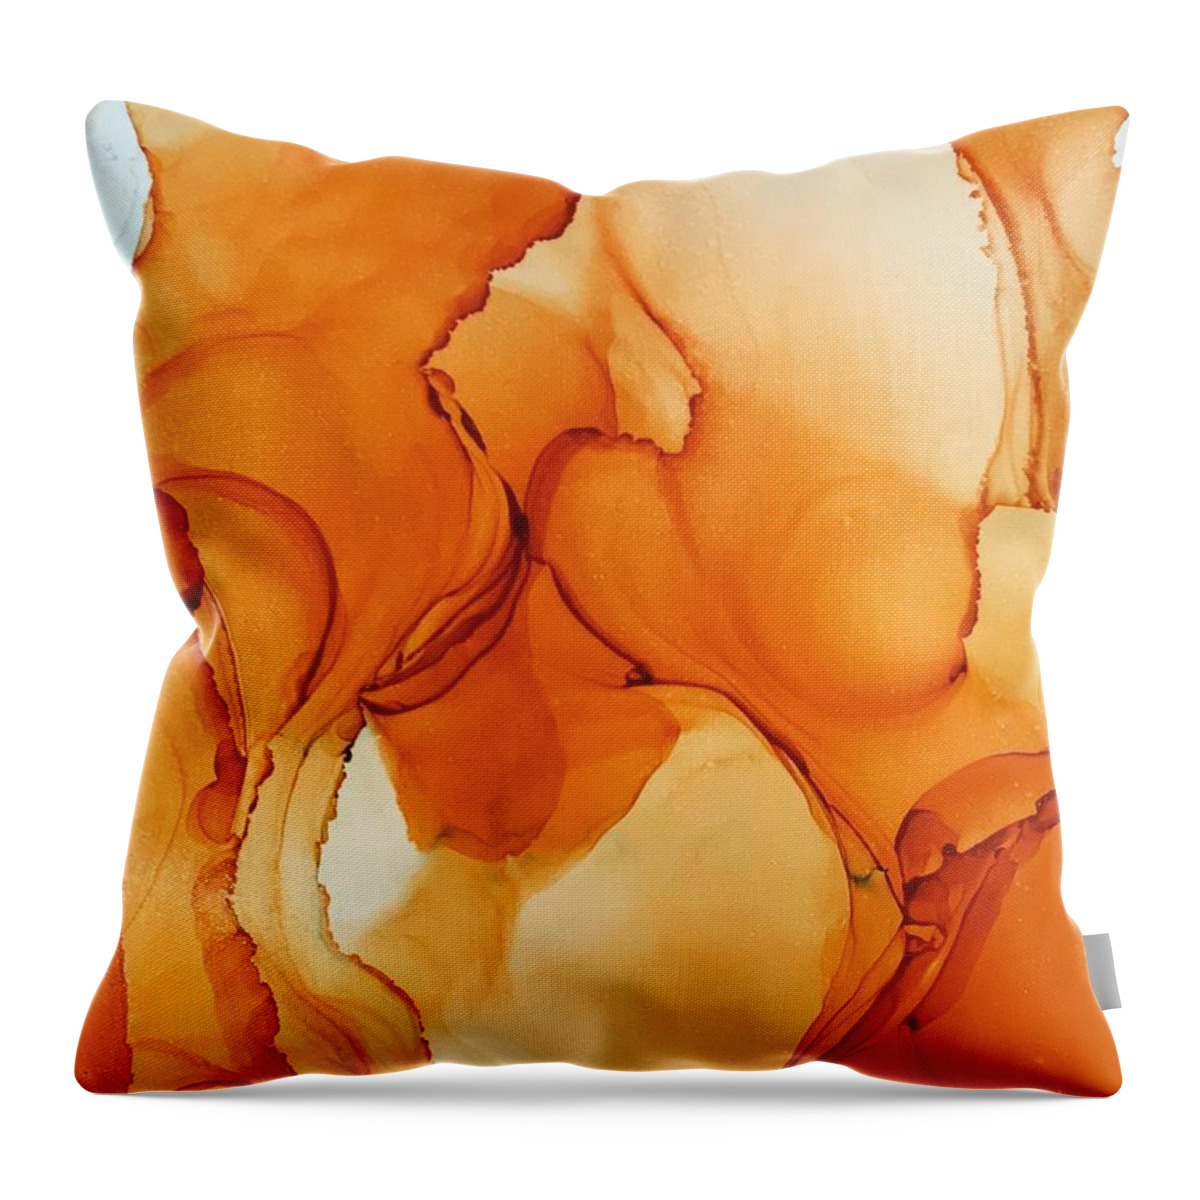 Abstract Throw Pillow featuring the painting Orange you glad? by Eric Fischer